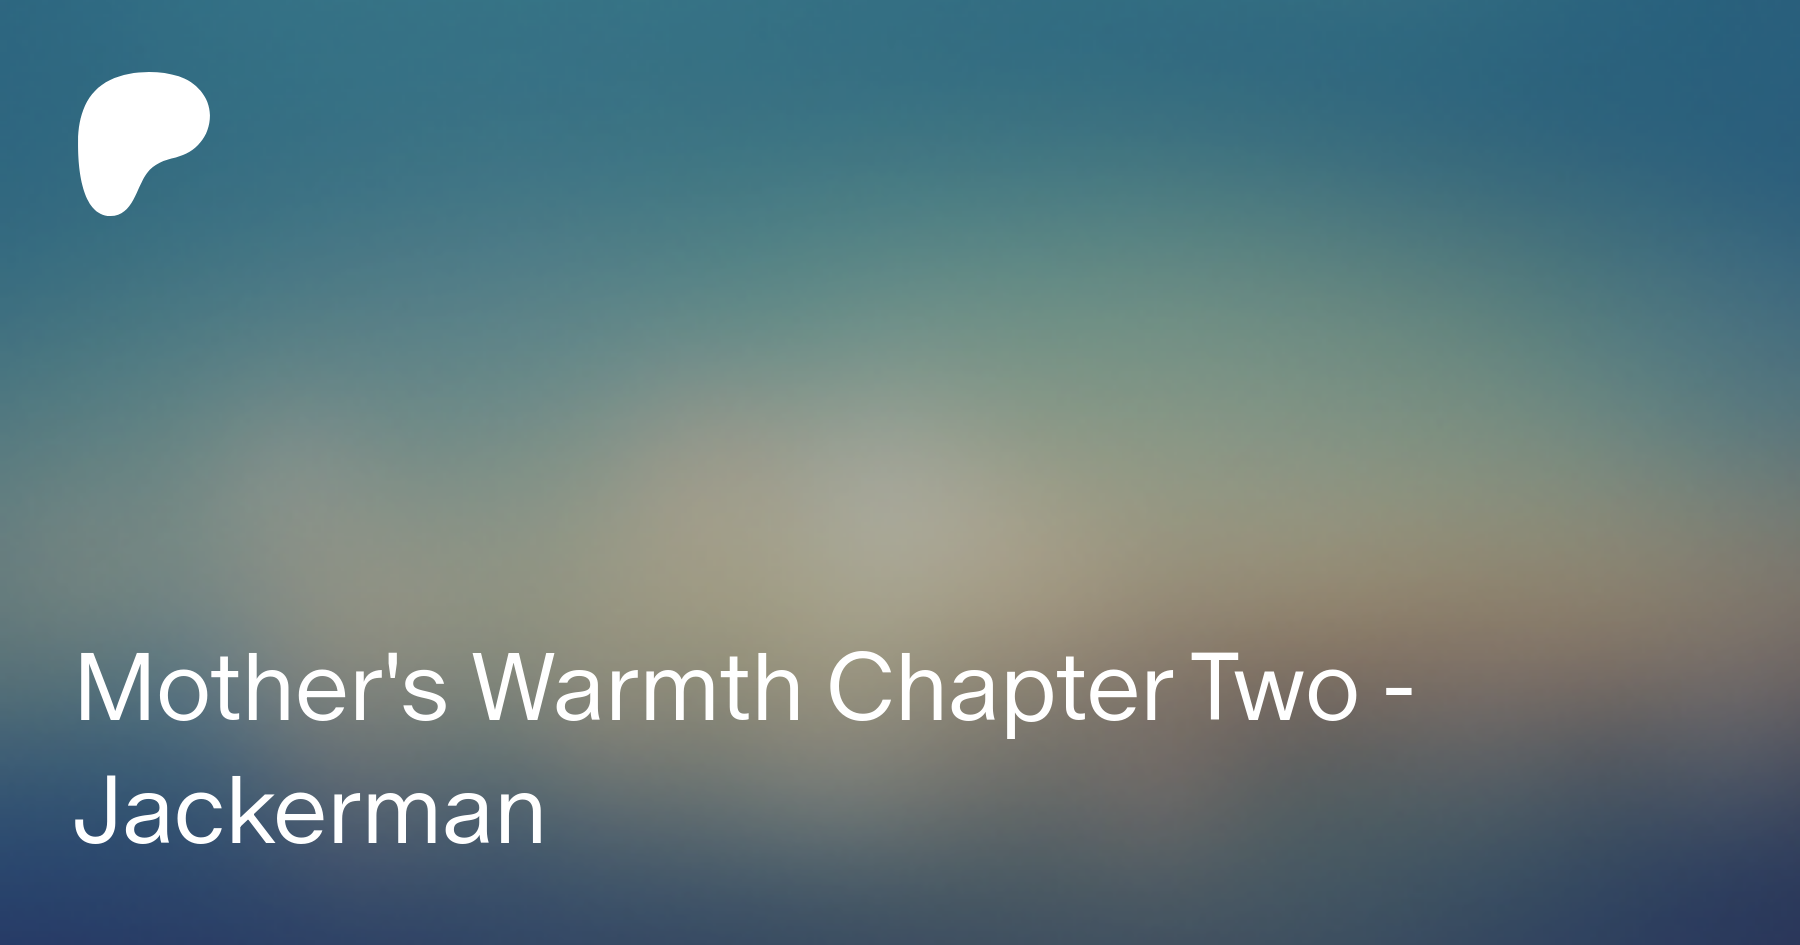 Mother's warmth chapter 3 jackerman